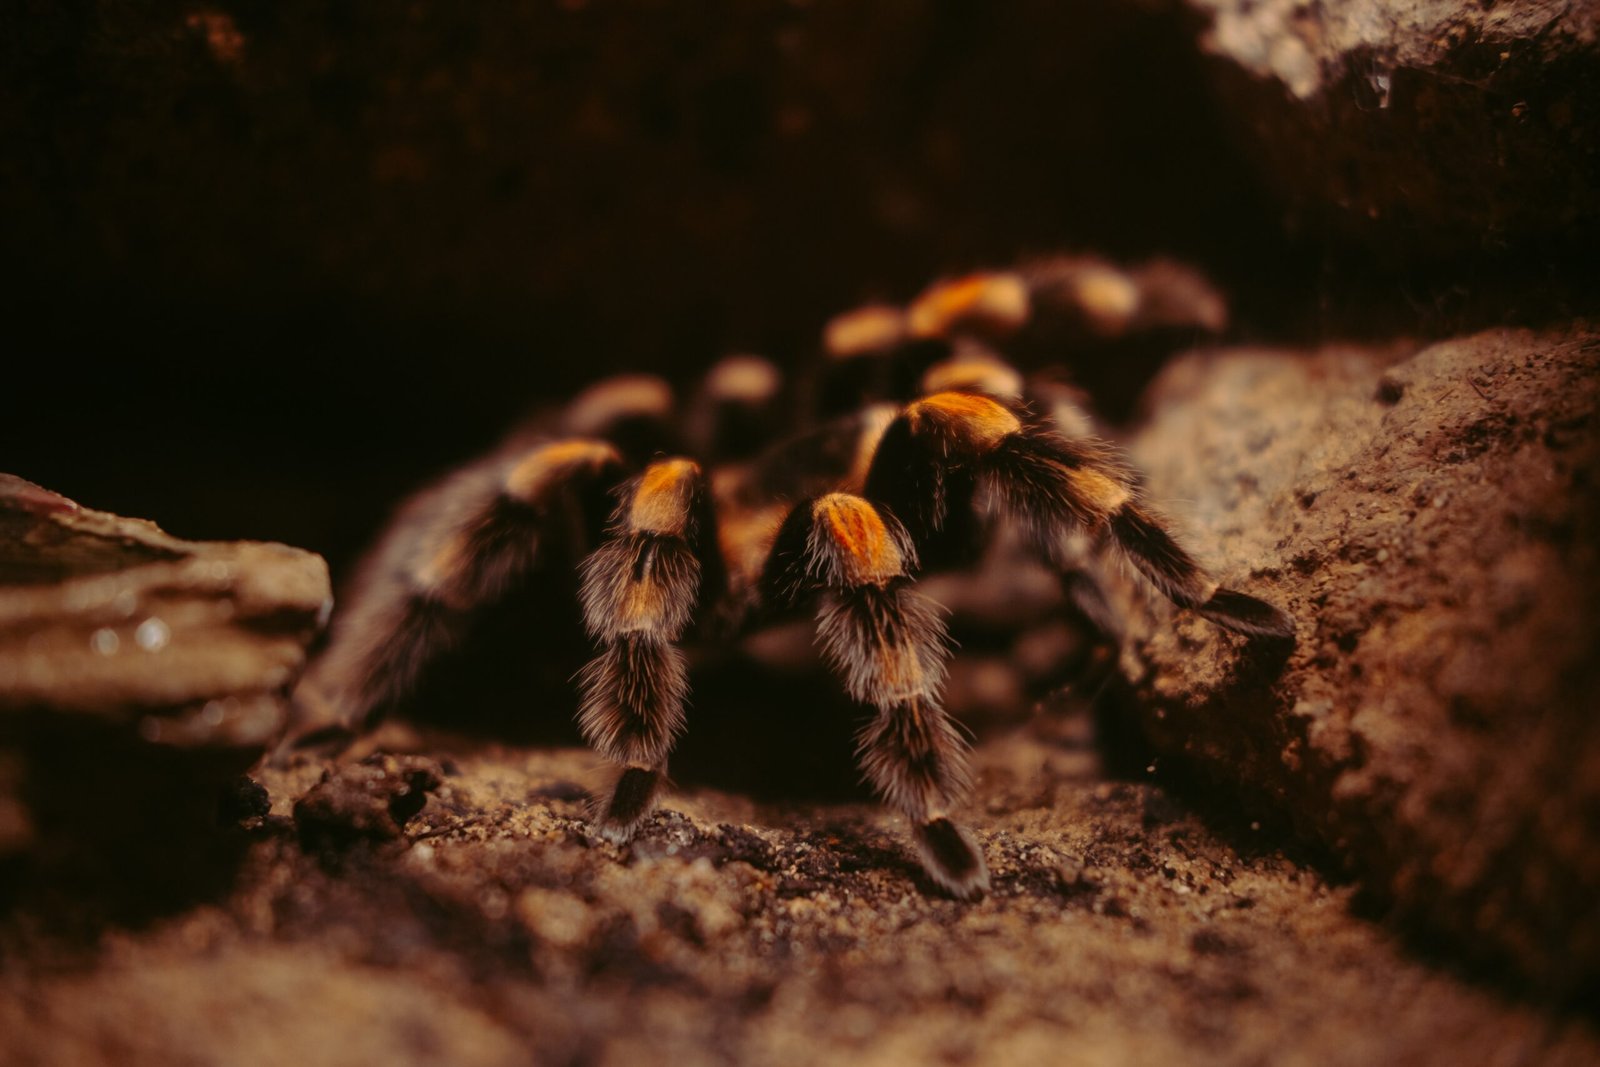 Are There Specific Environmental Factors That Affect Tarantula Predation Rates During Migration?